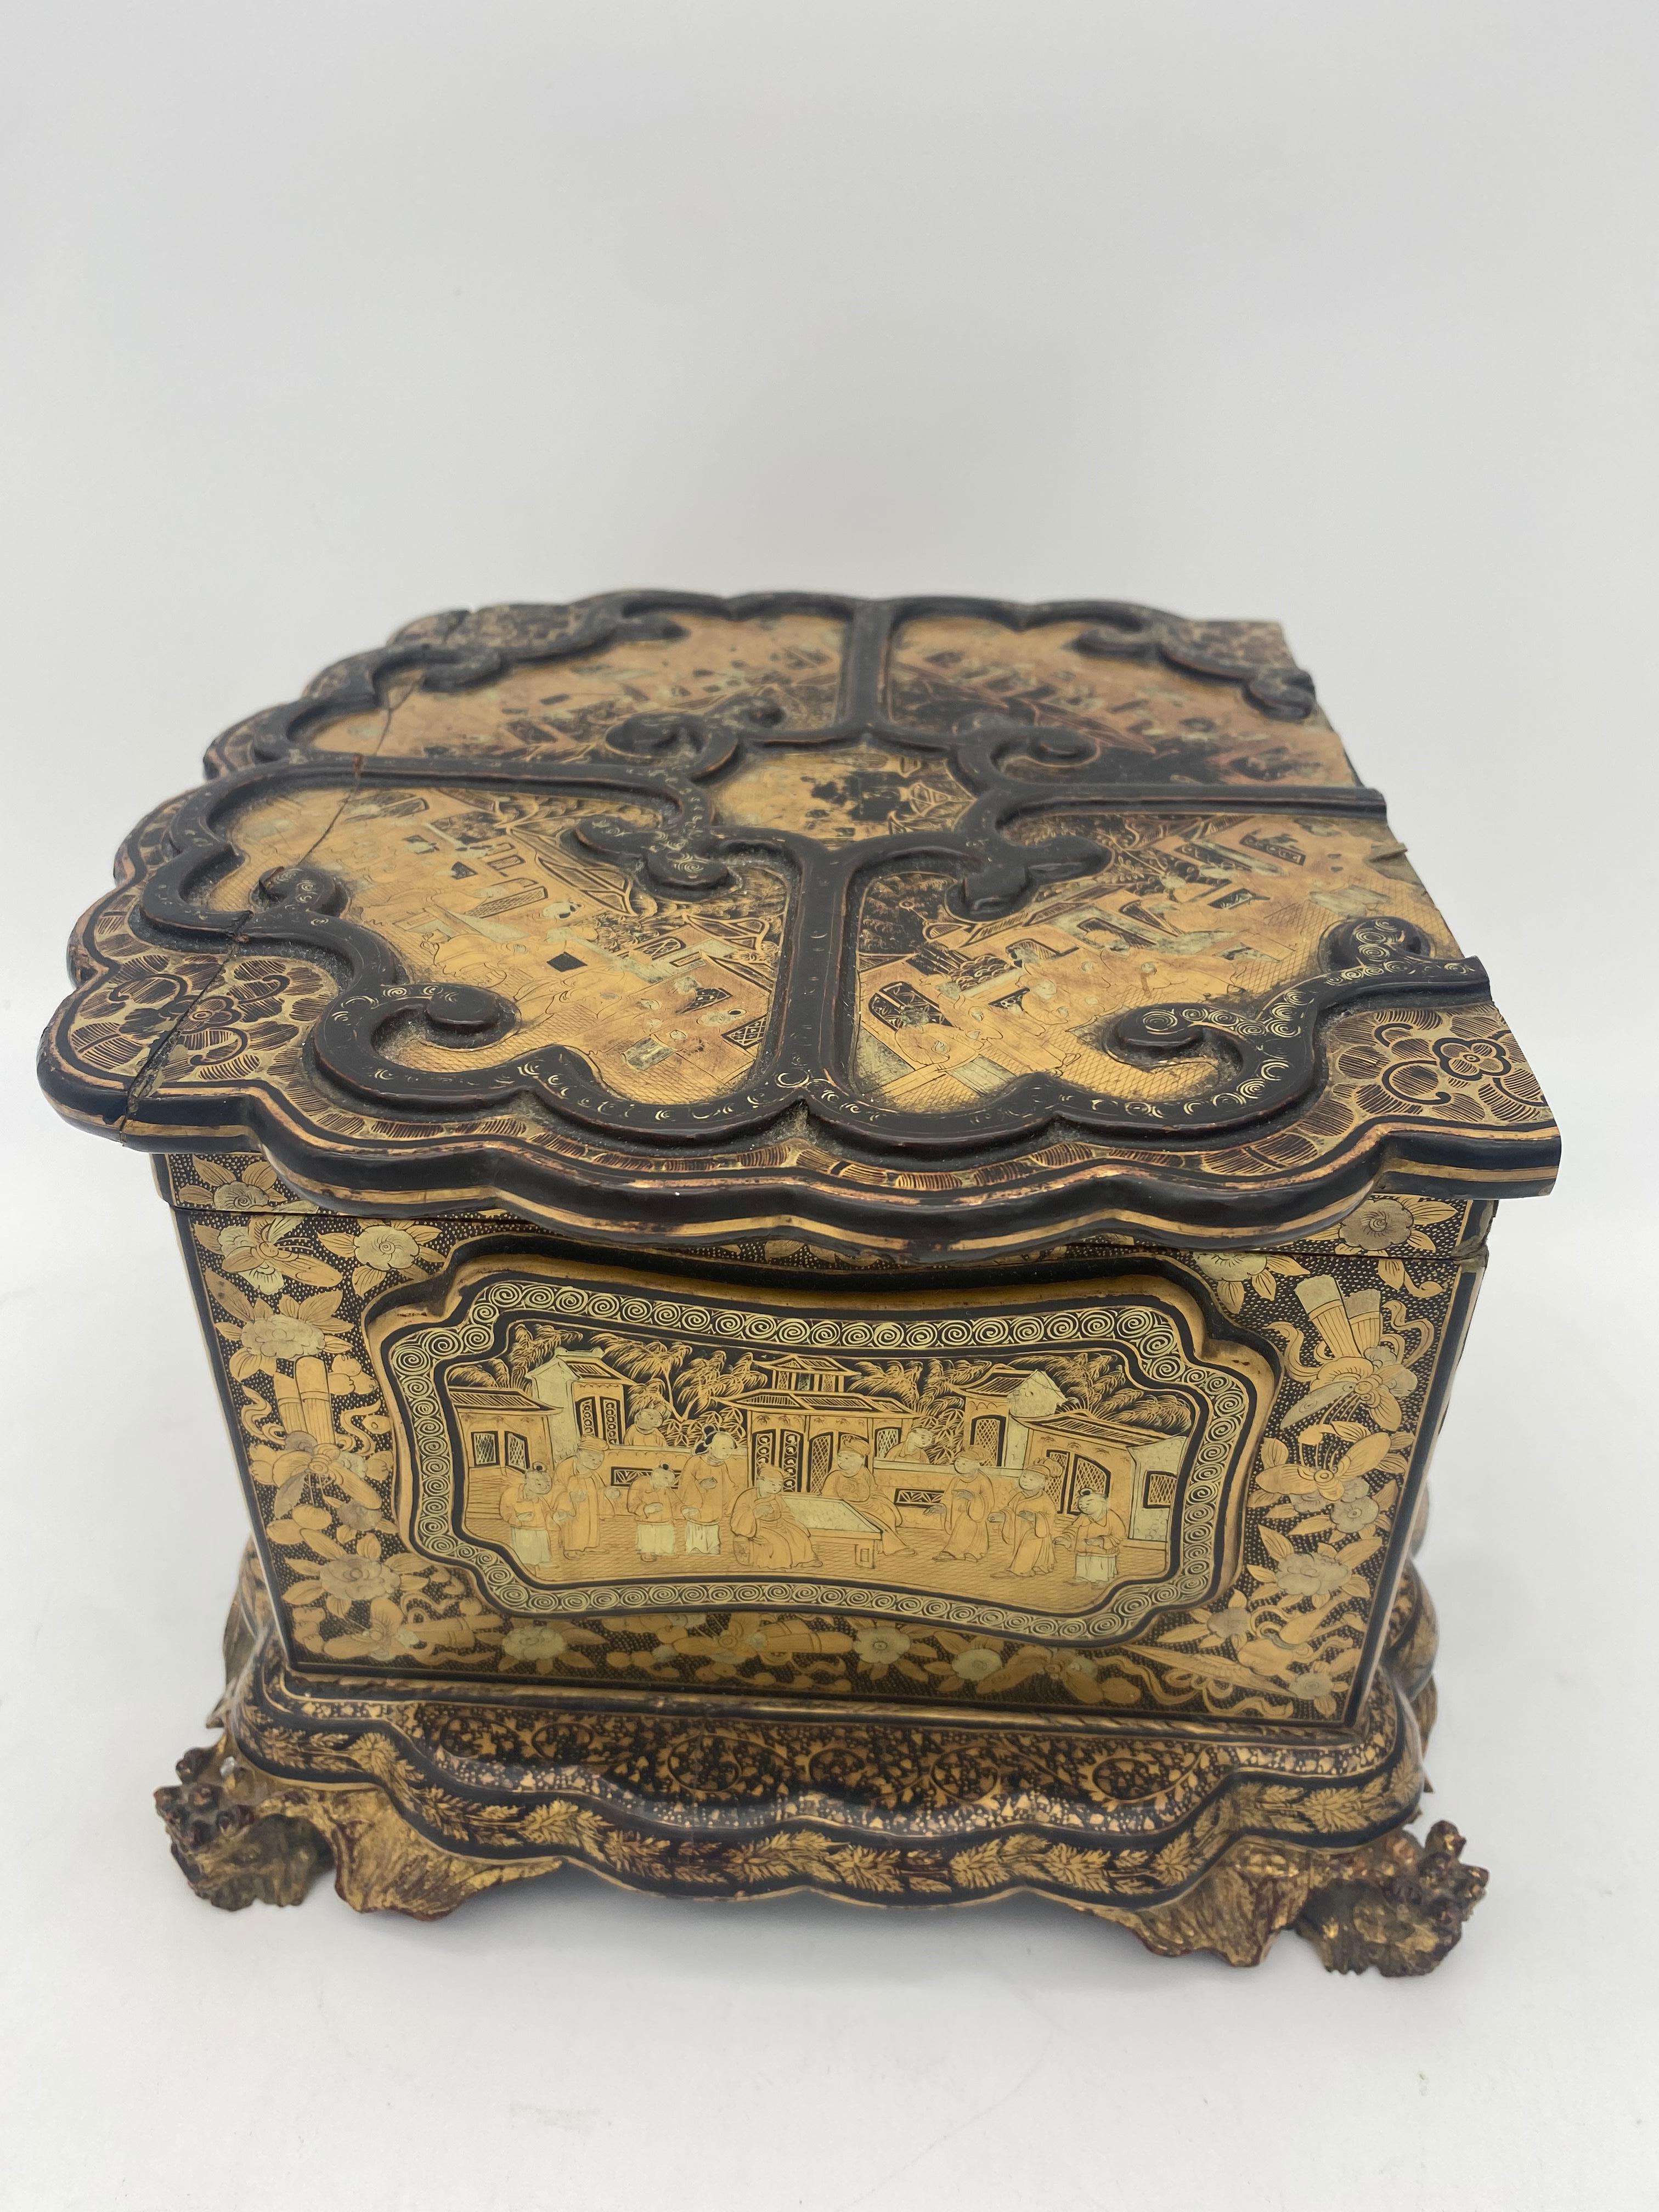 Unique 19th Century  Export Chinese Gilt Chinoiserie Lacquer Box For Sale 3